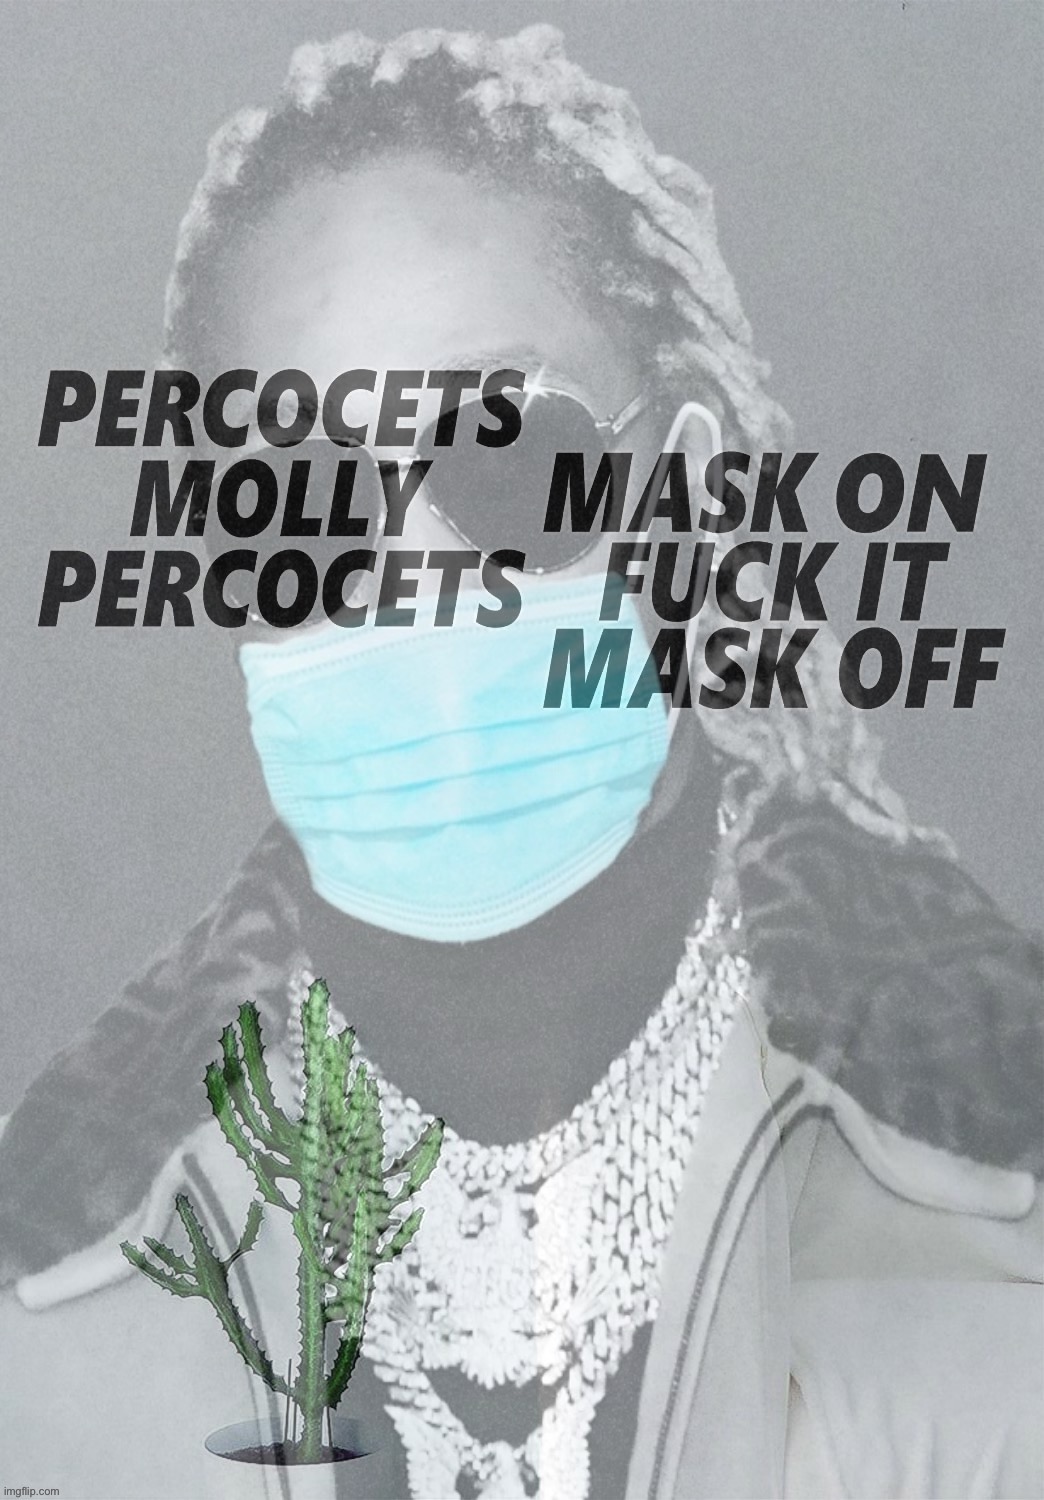 Why is there a potted cactus in this meme | image tagged in future percocets molly percocets mask off,future,gangsta rap made me do it,cactus,rapper,mask off | made w/ Imgflip meme maker